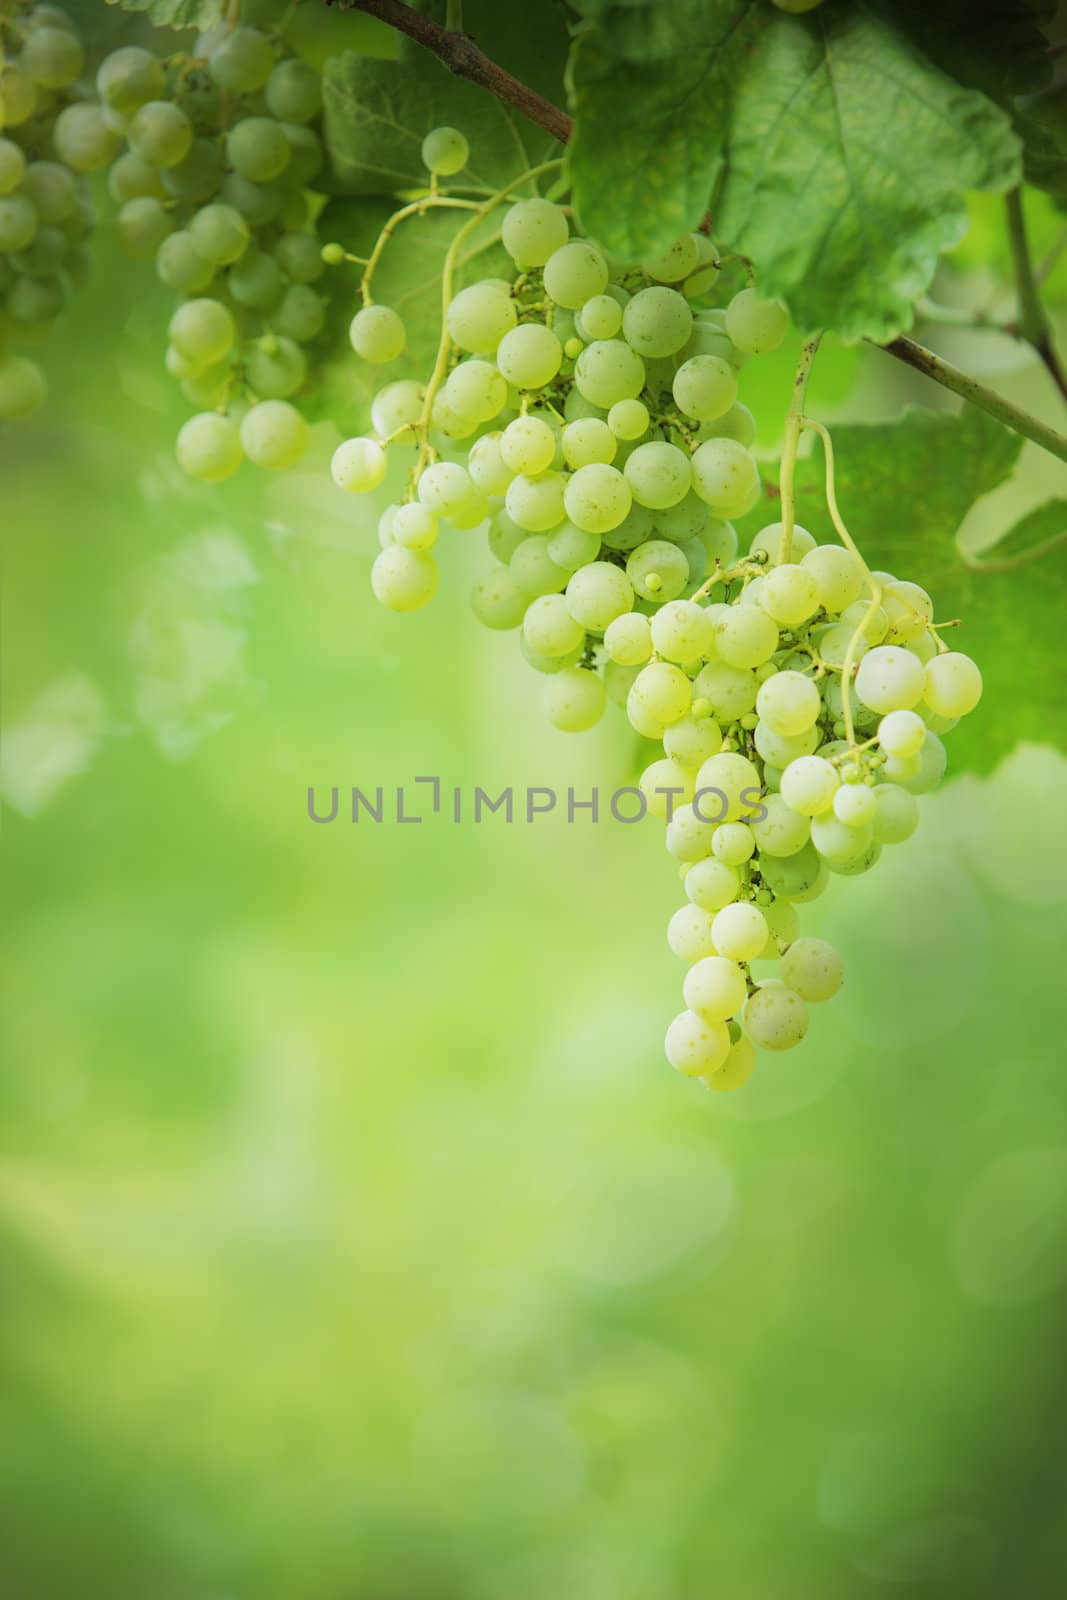 Bunches of growing green grapes.